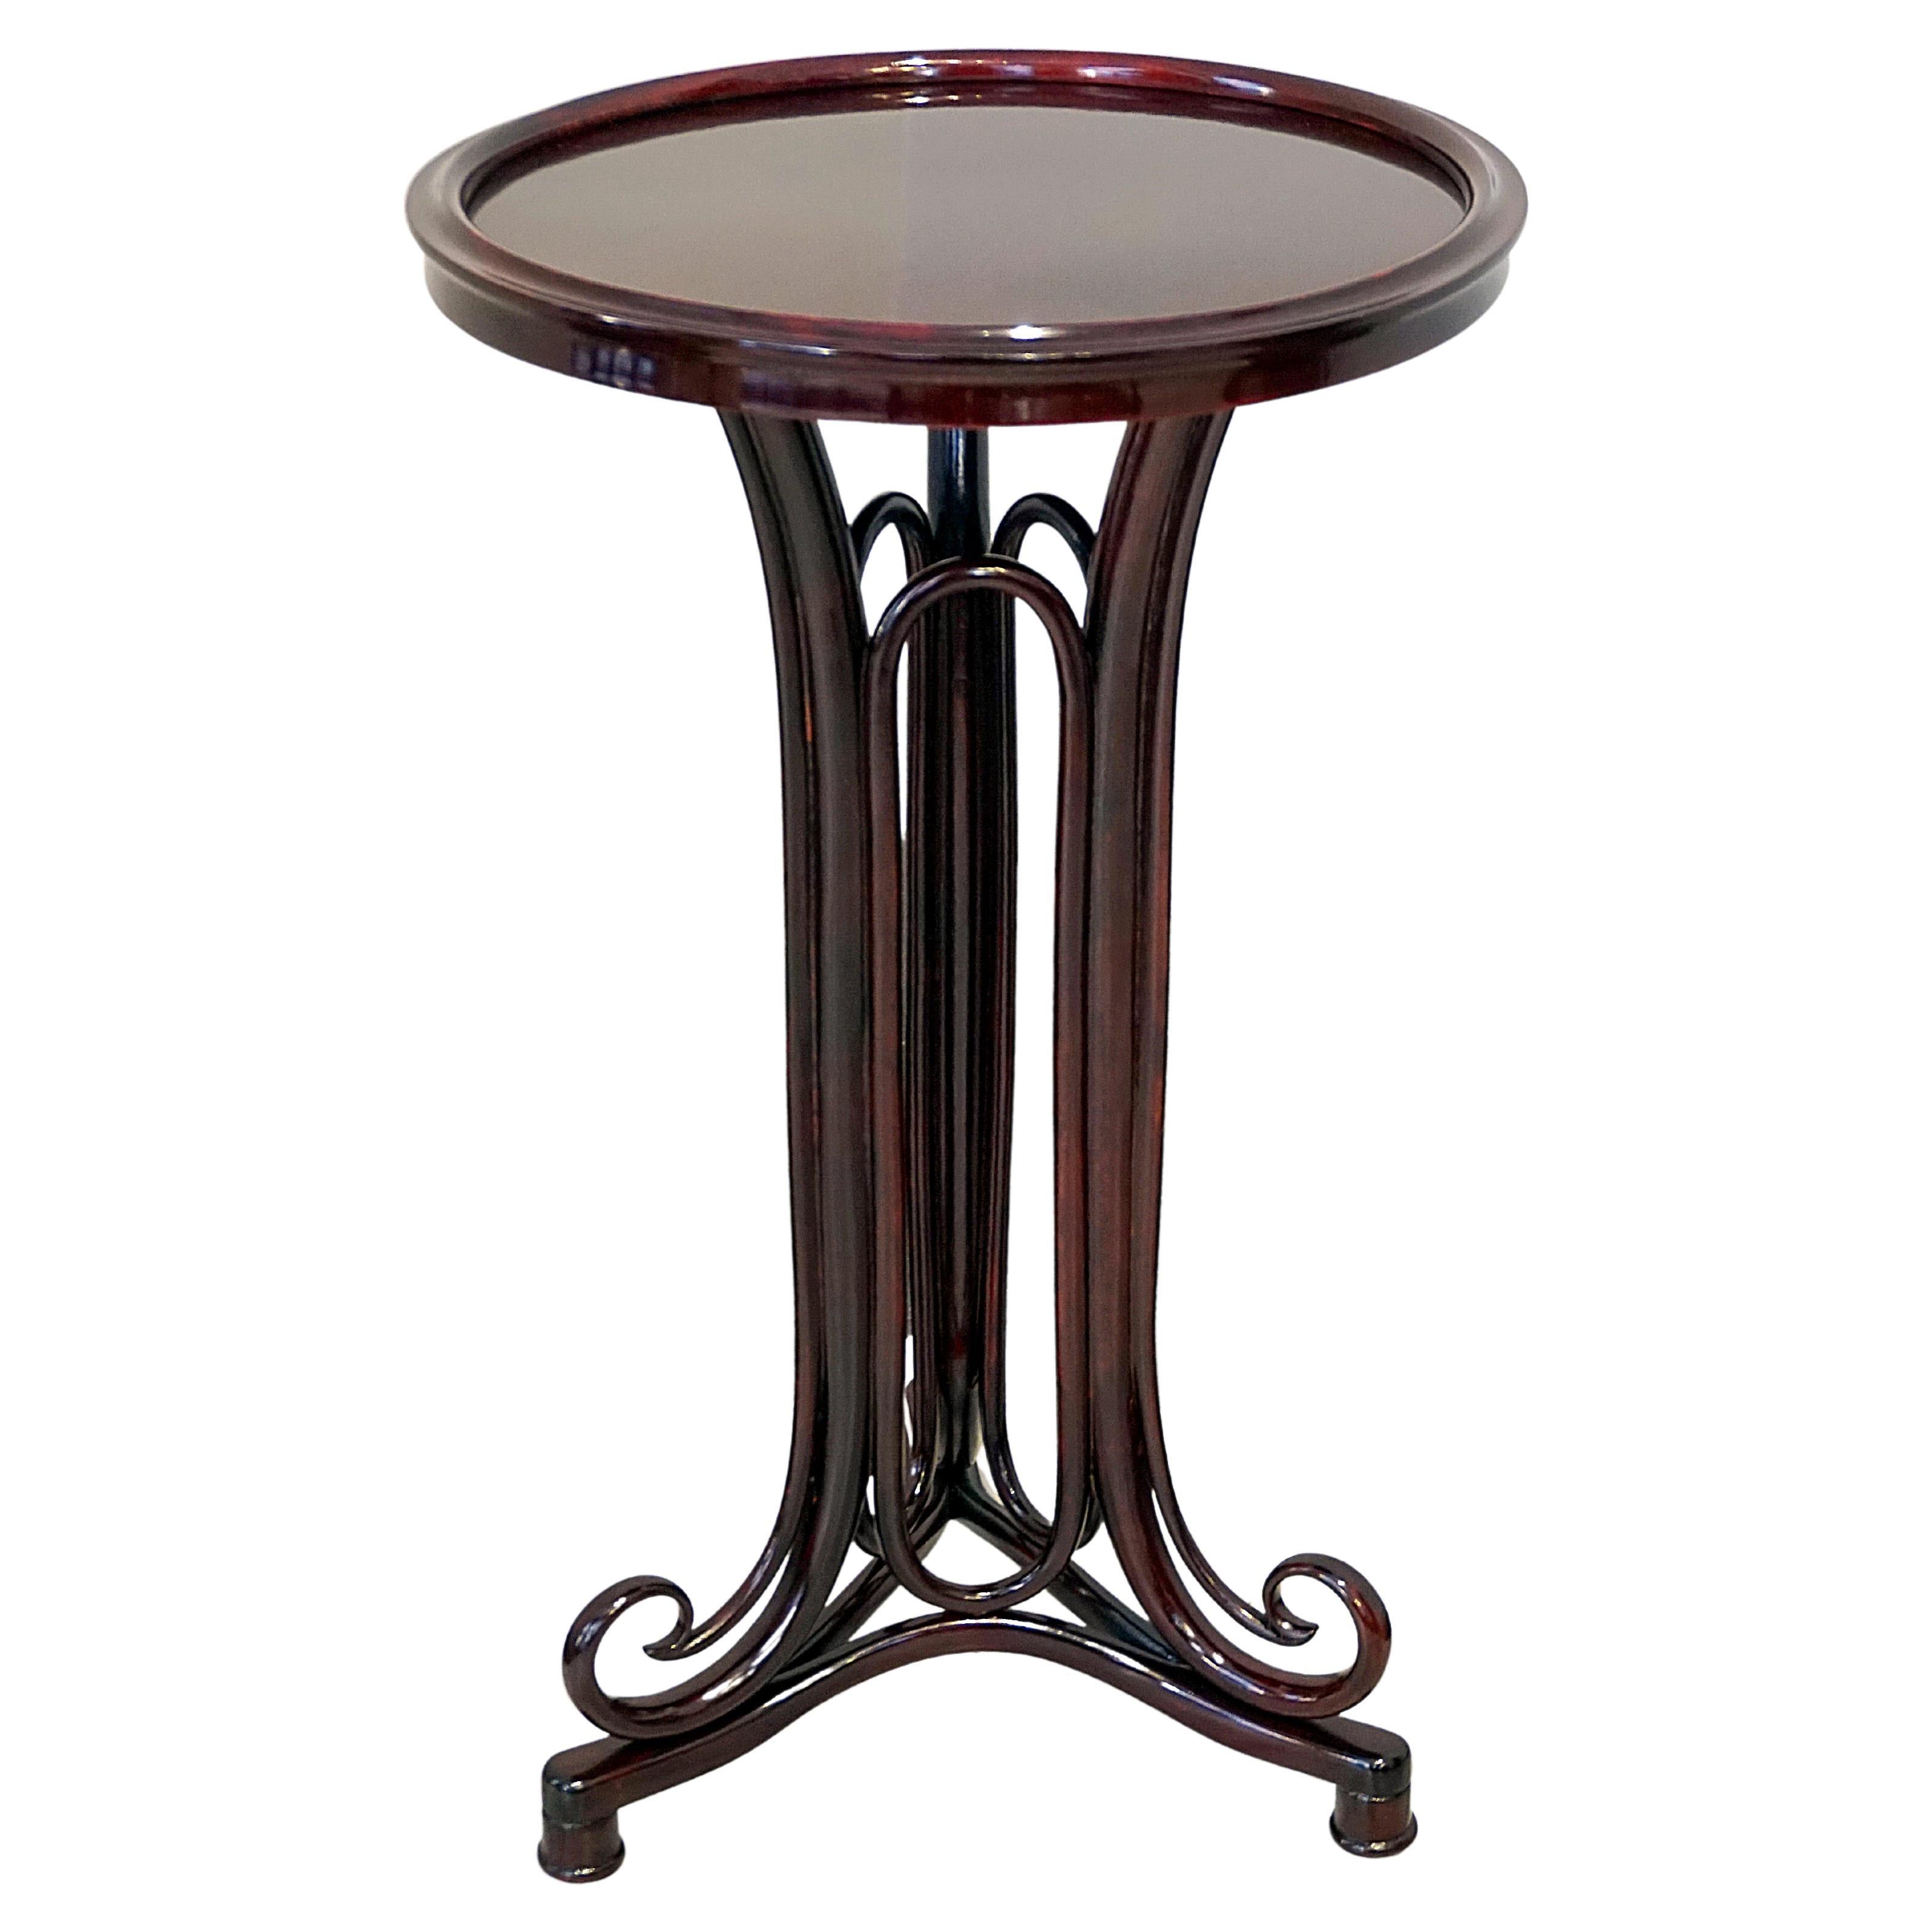 Thonet Vienna Art Nouveau Saloon Reading Table No 1 Mahogany Stained circa 1900  For Sale